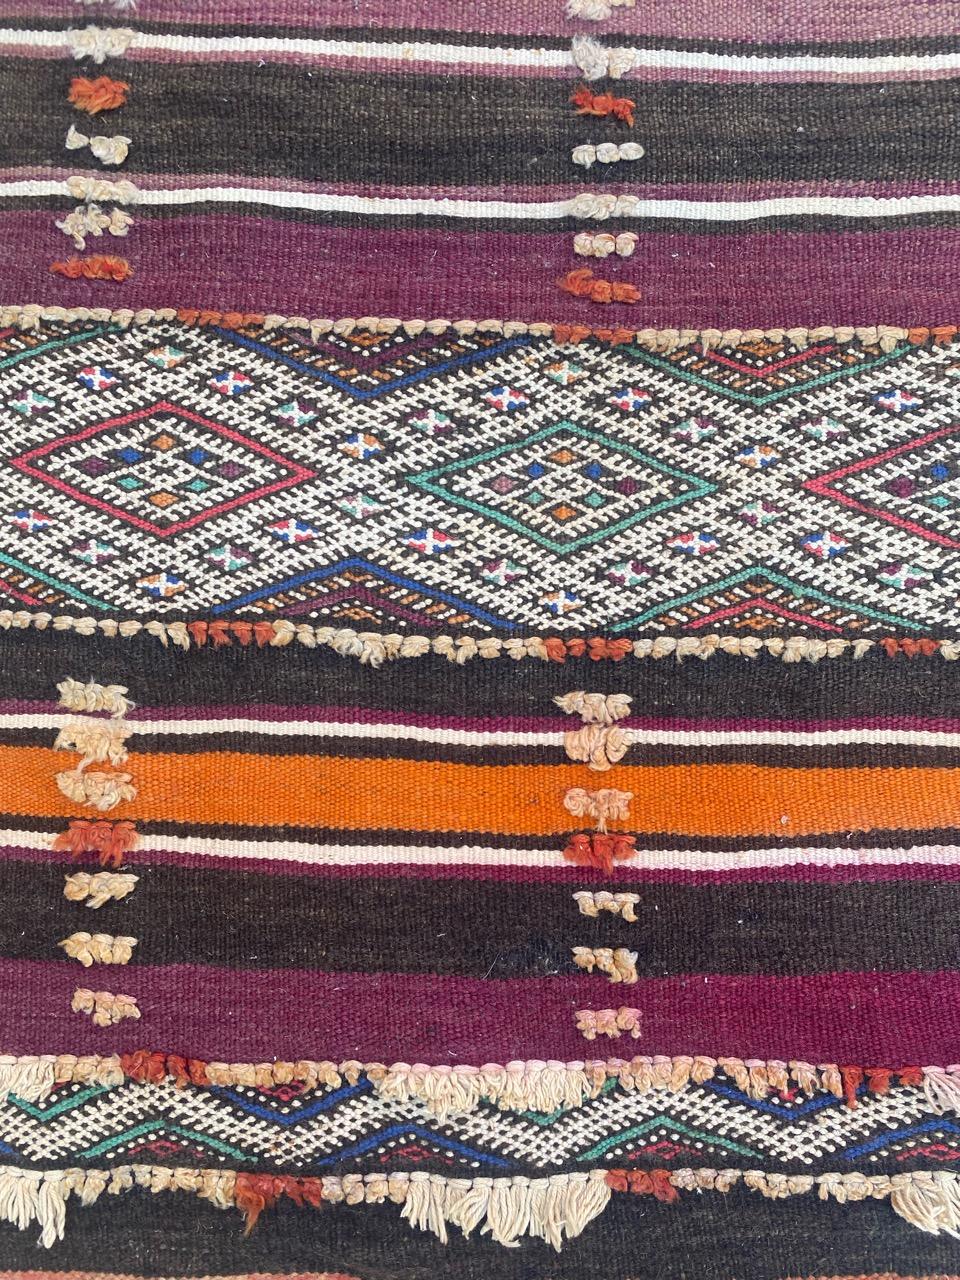 Discover the timeless elegance of a Berber Moroccan Kilim from the early 20th century. This exquisite flat rug boasts a captivating geometric tribal design in stunning natural colors, including purple, orange, green, blue, brown, pink, and white.